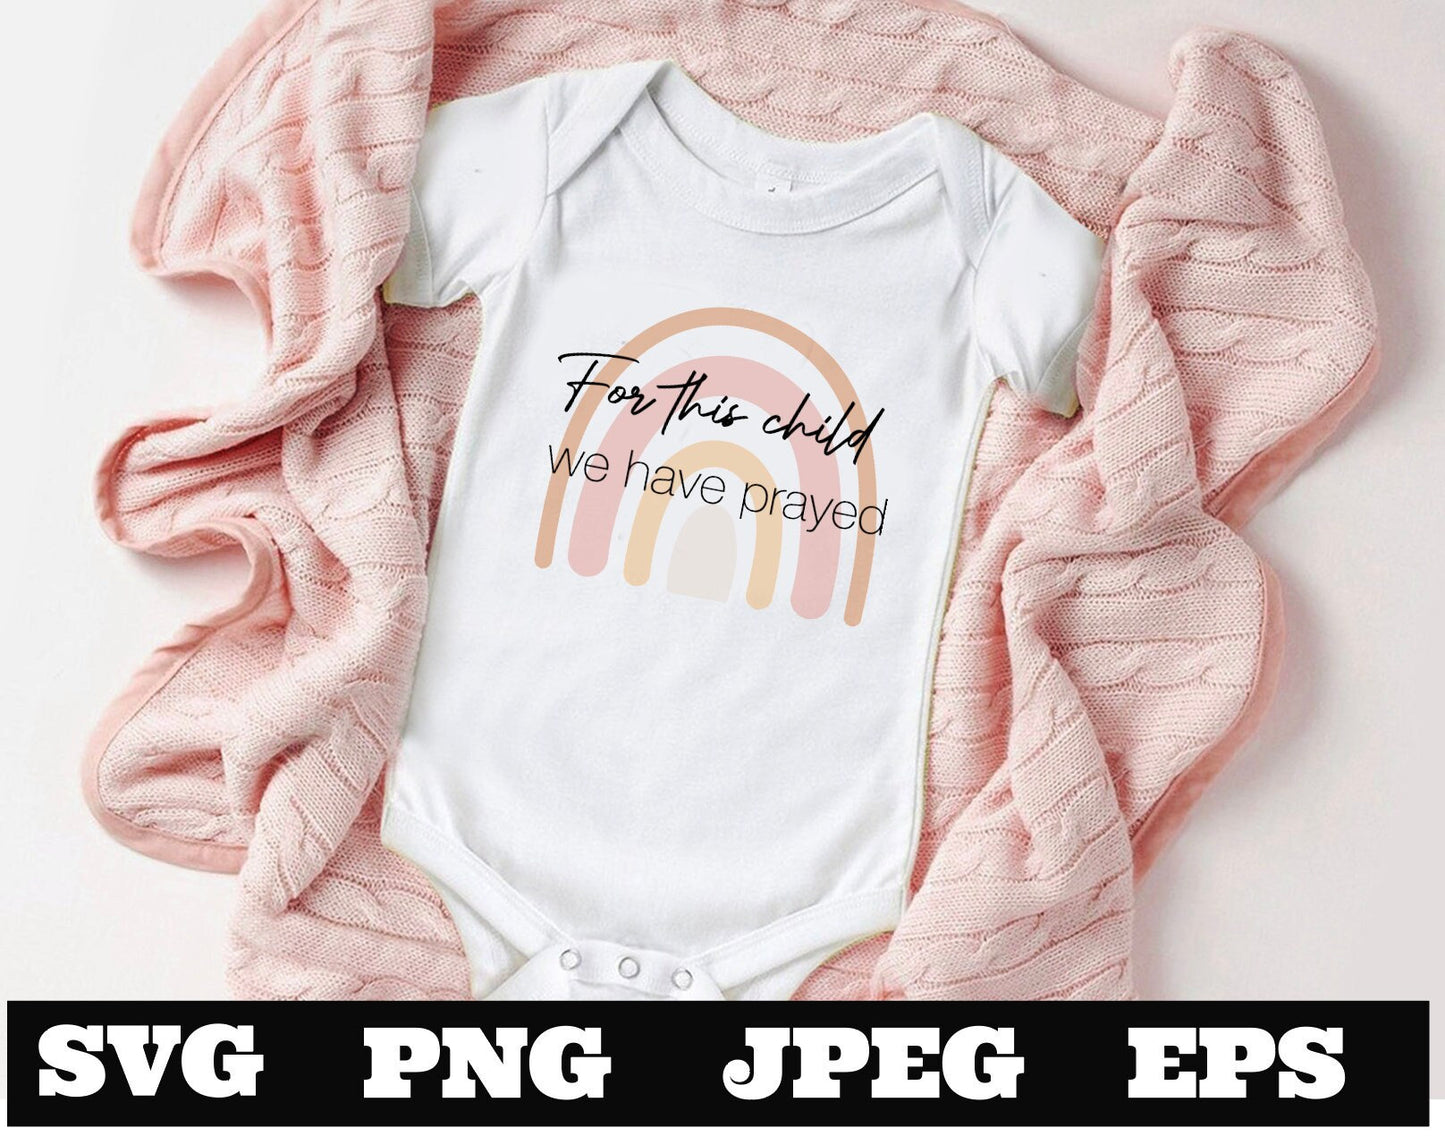 For this child we have prayed PNG EPS SVG jpeg Download Christian svg Jeus png T shirts vinyl Kids Church T Shirt Baby Shirt Christian